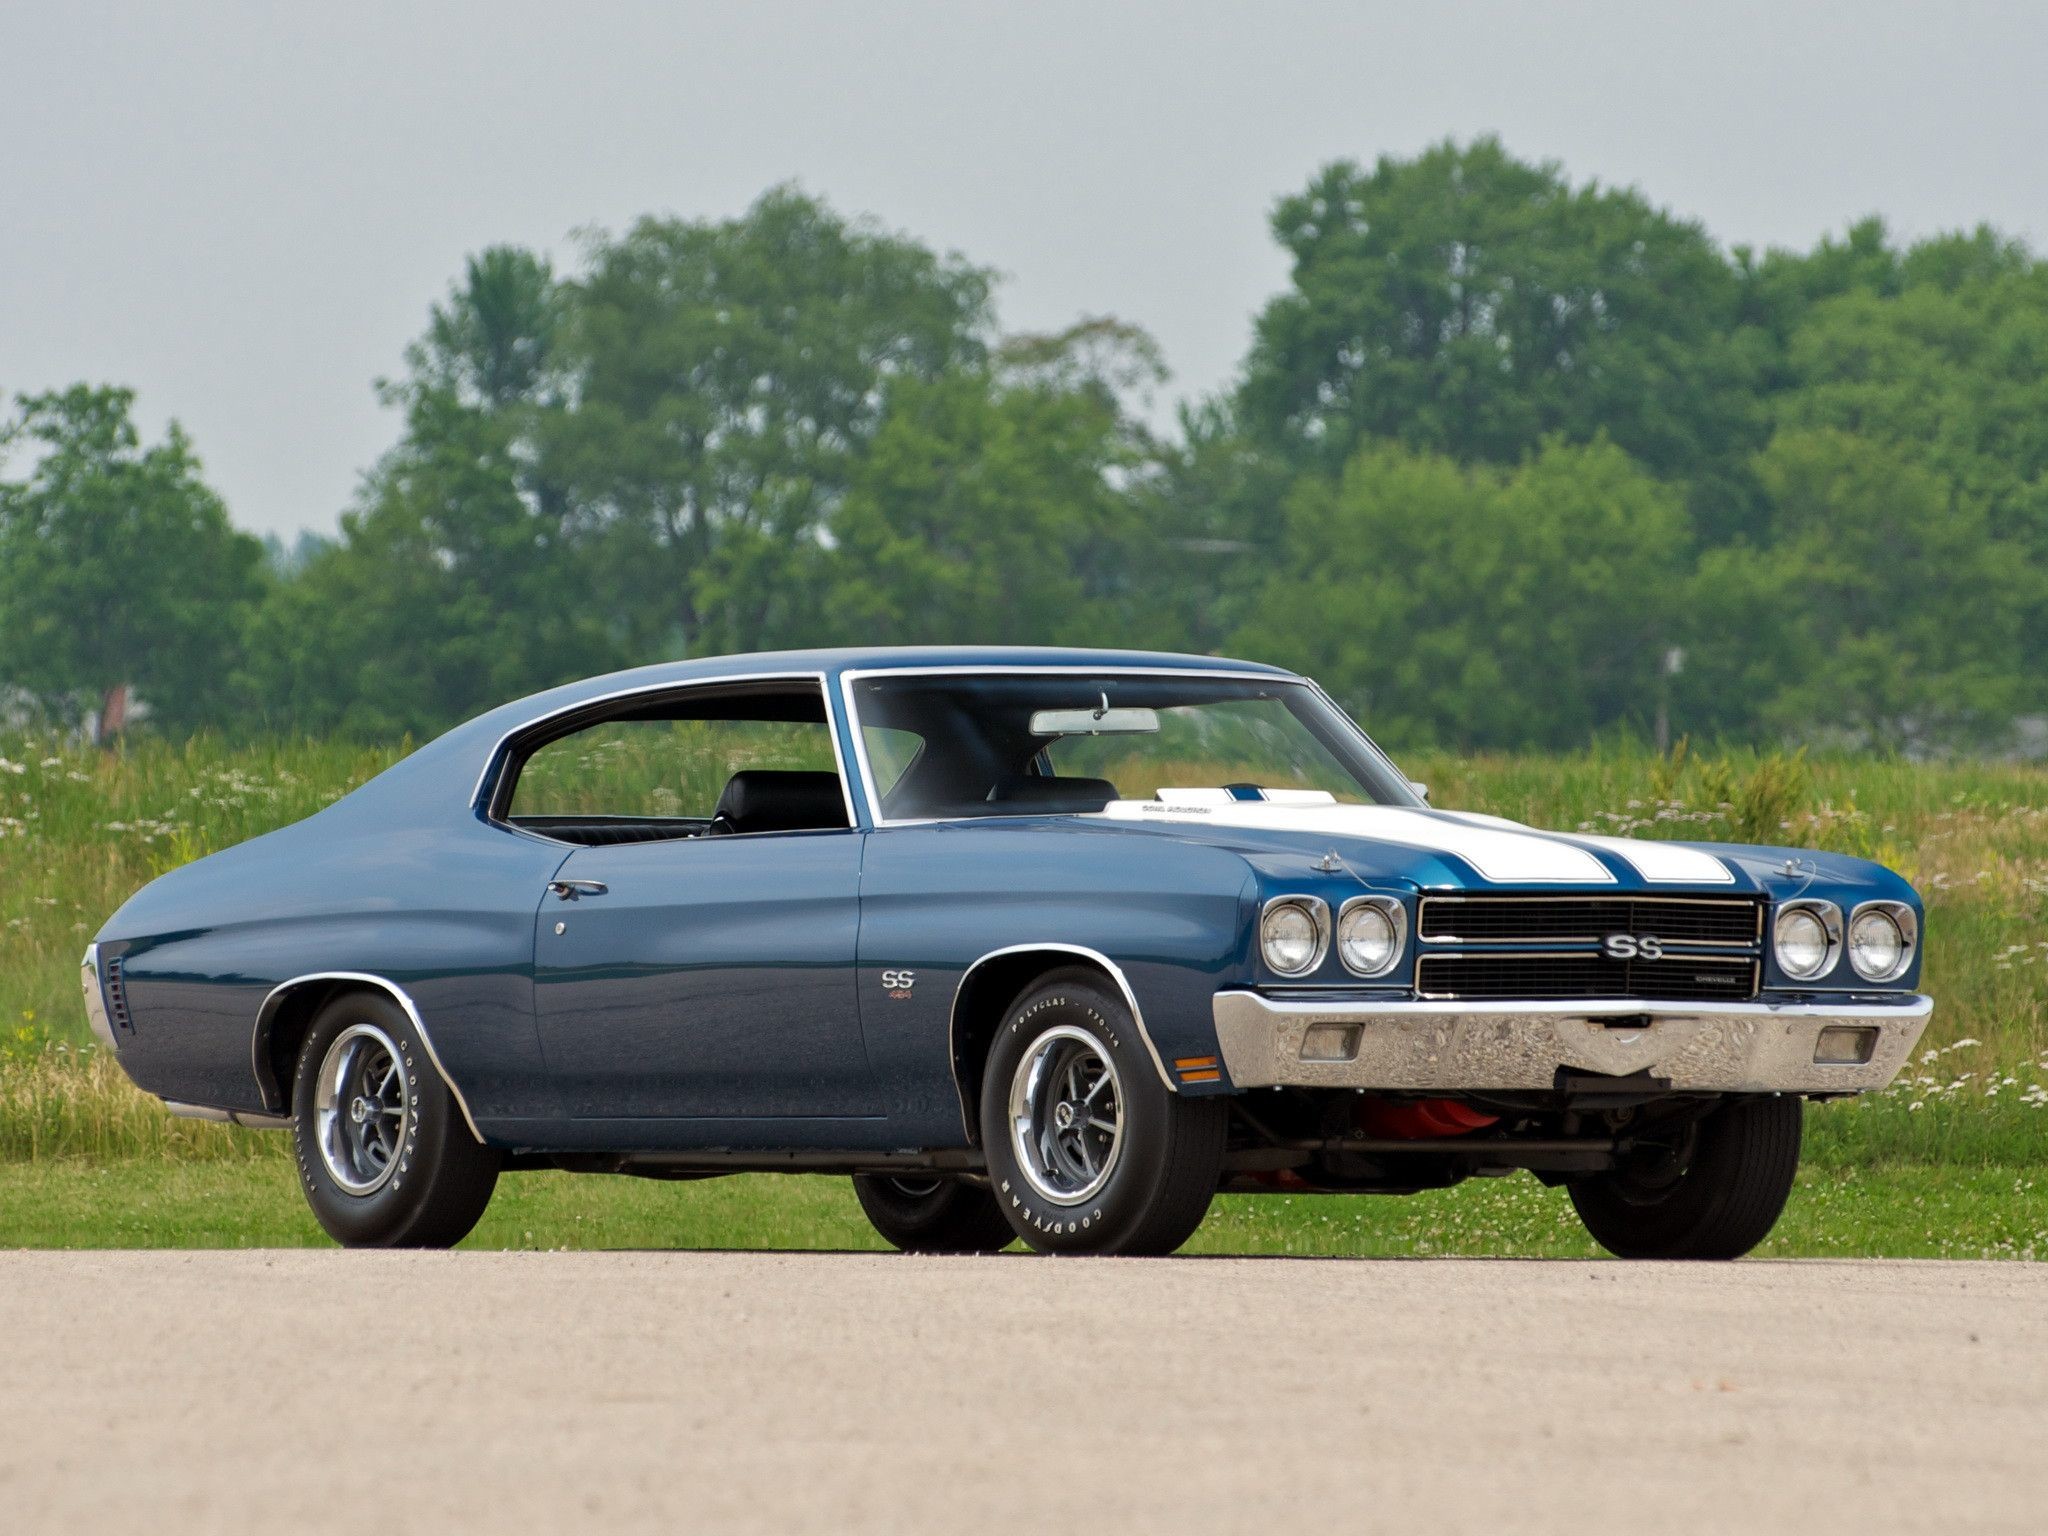 72 Chevelle Wallpapers Phone